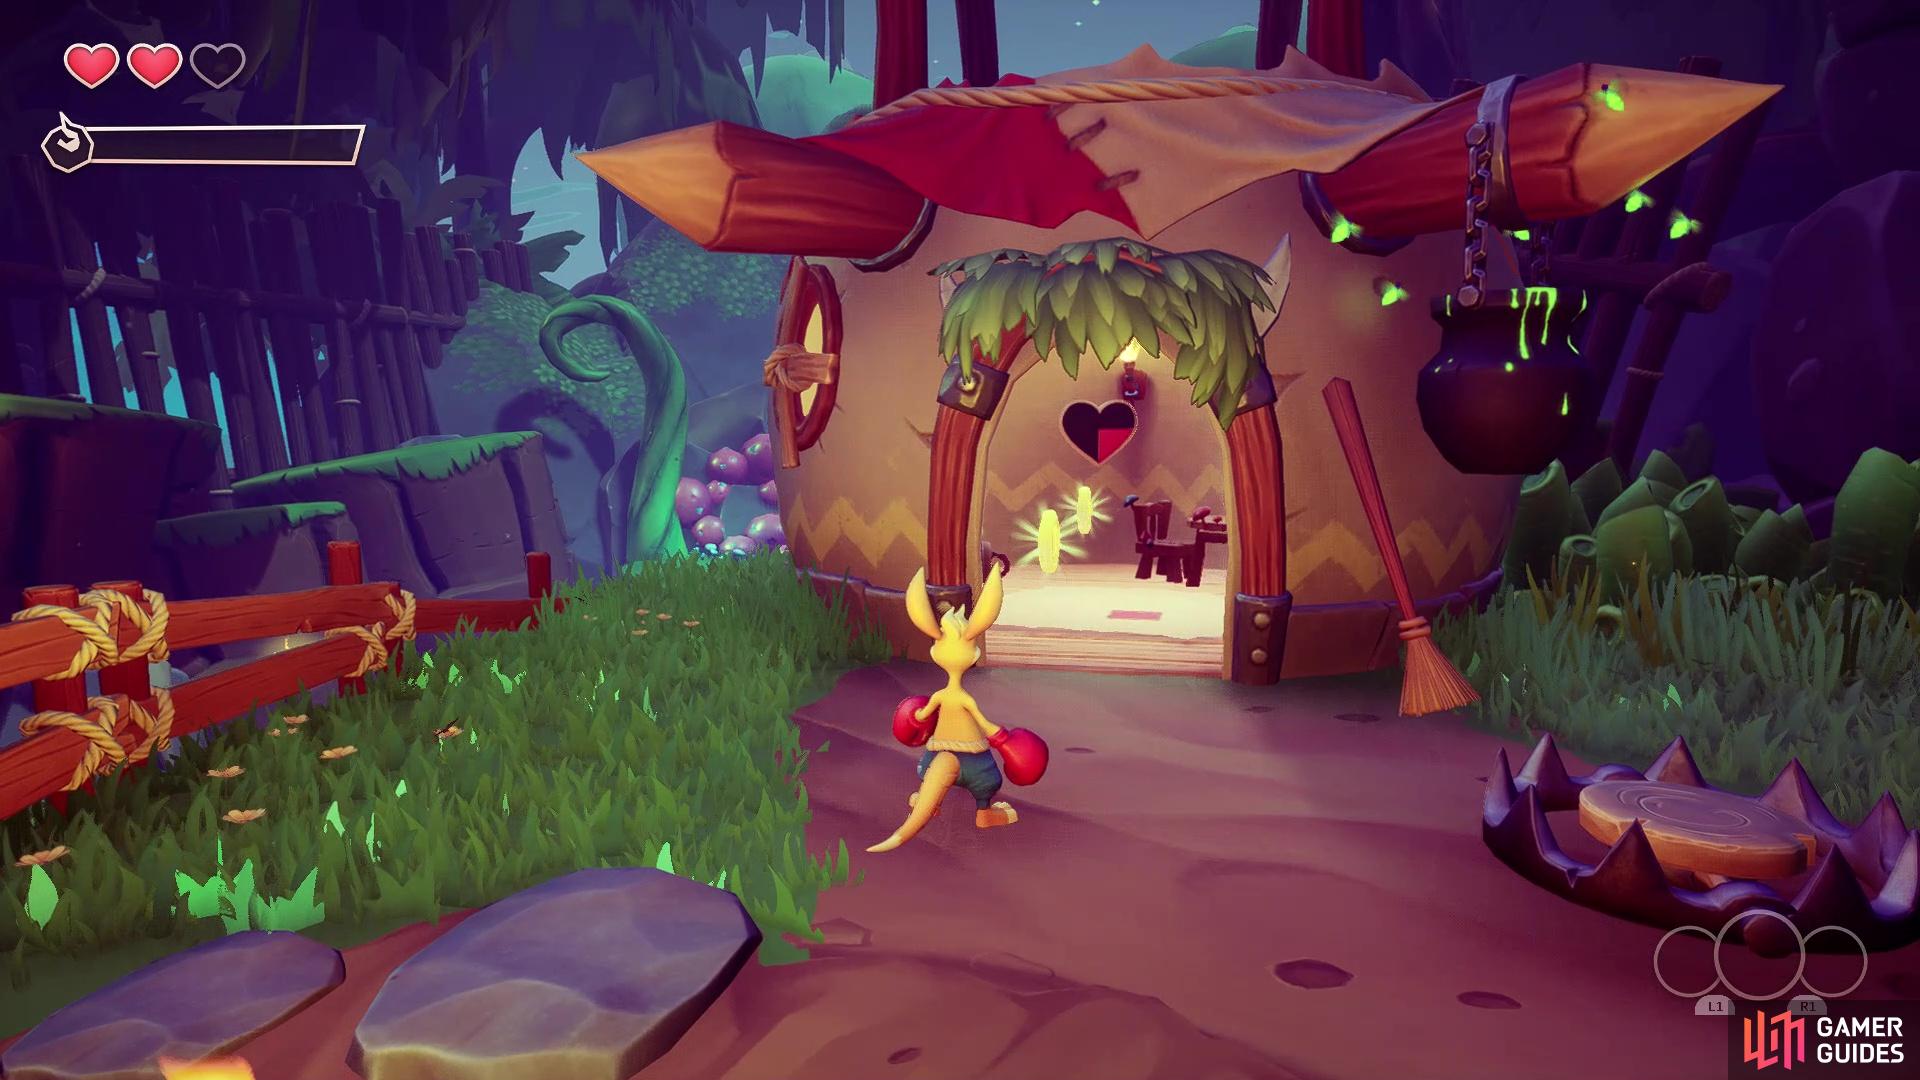 The first Heart Piece will be inside the hut before being introduced to the Frogster enemy